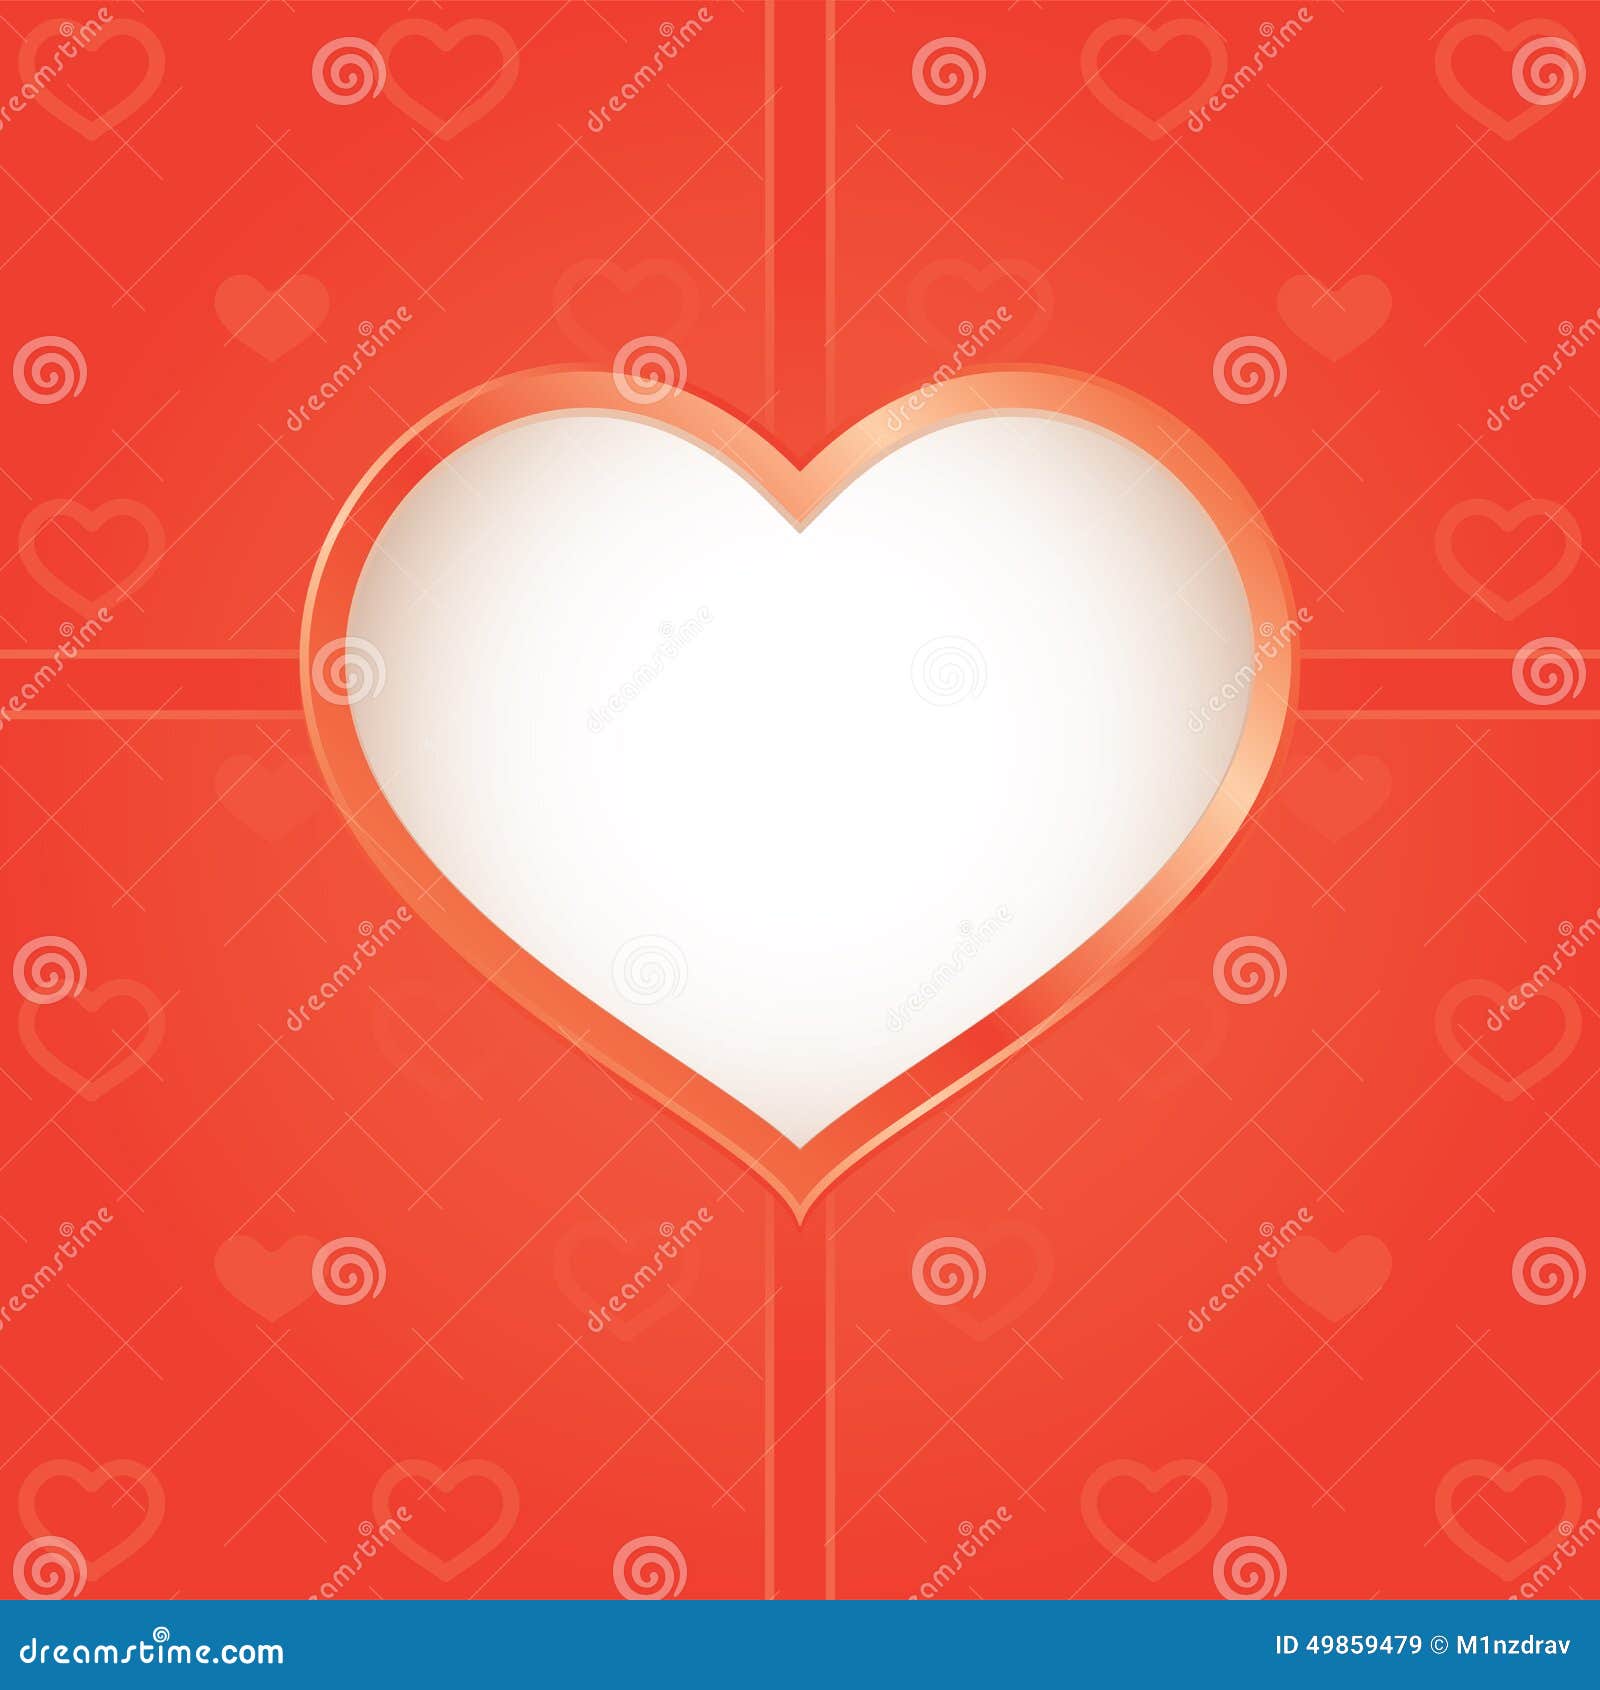 The card heart stock vector. Illustration of vector, emotions - 49859479